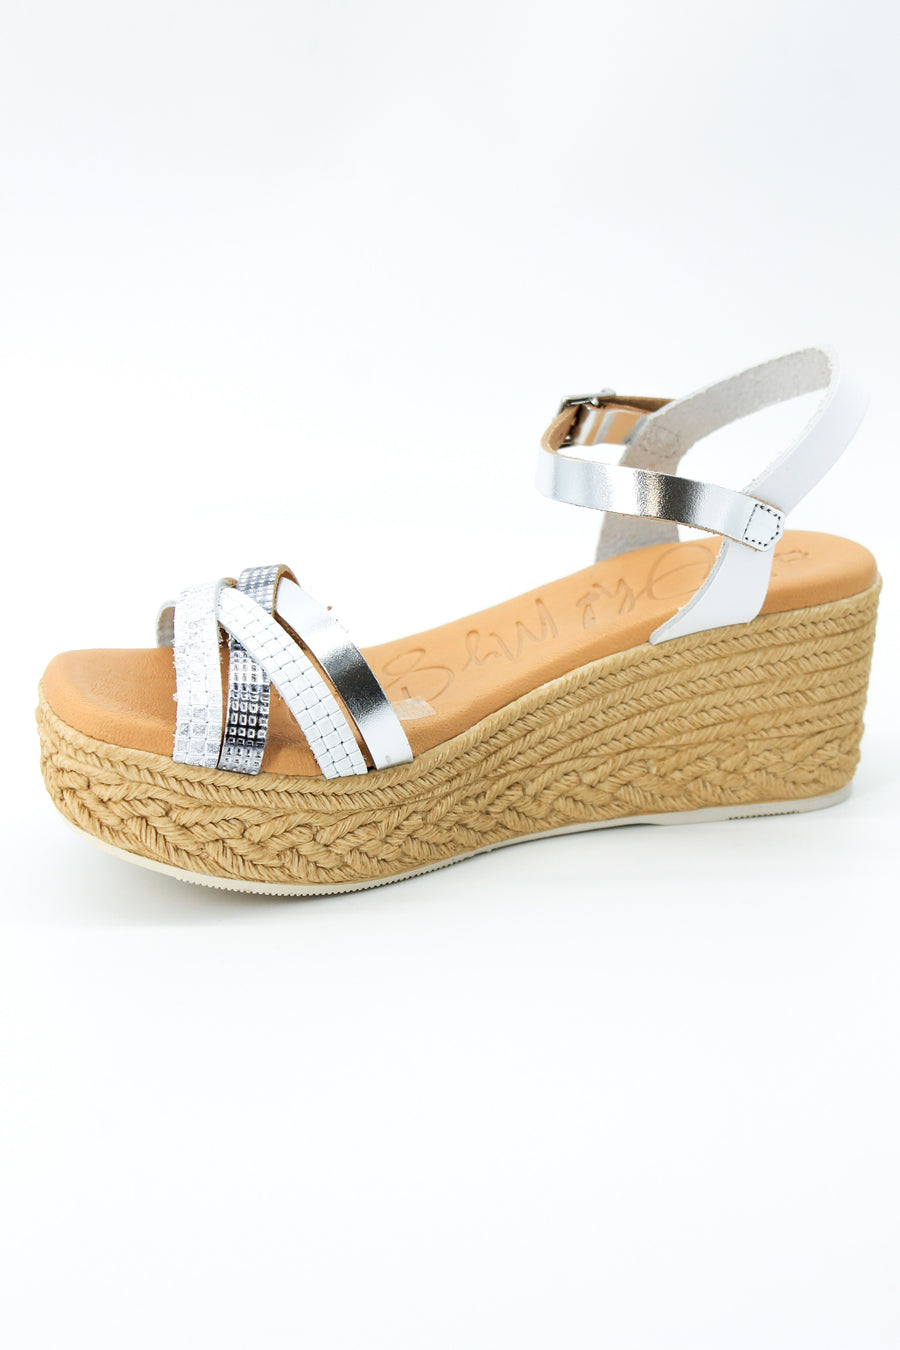 Oh My Sandals 5218 Silver